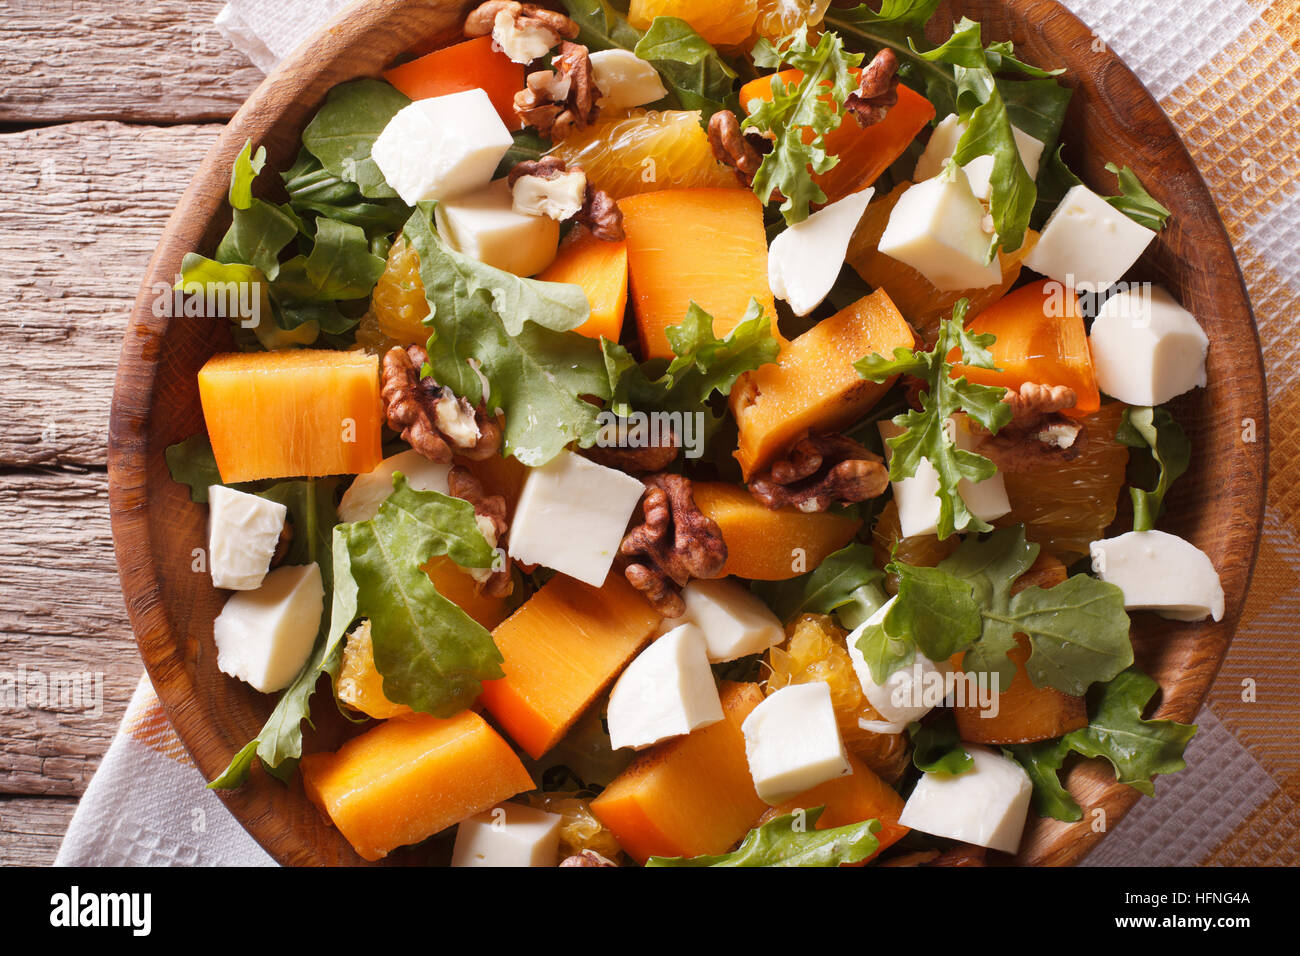 salad with persimmon, arugula, oranges and cheese close-up on the table. horizontal view from above Stock Photo